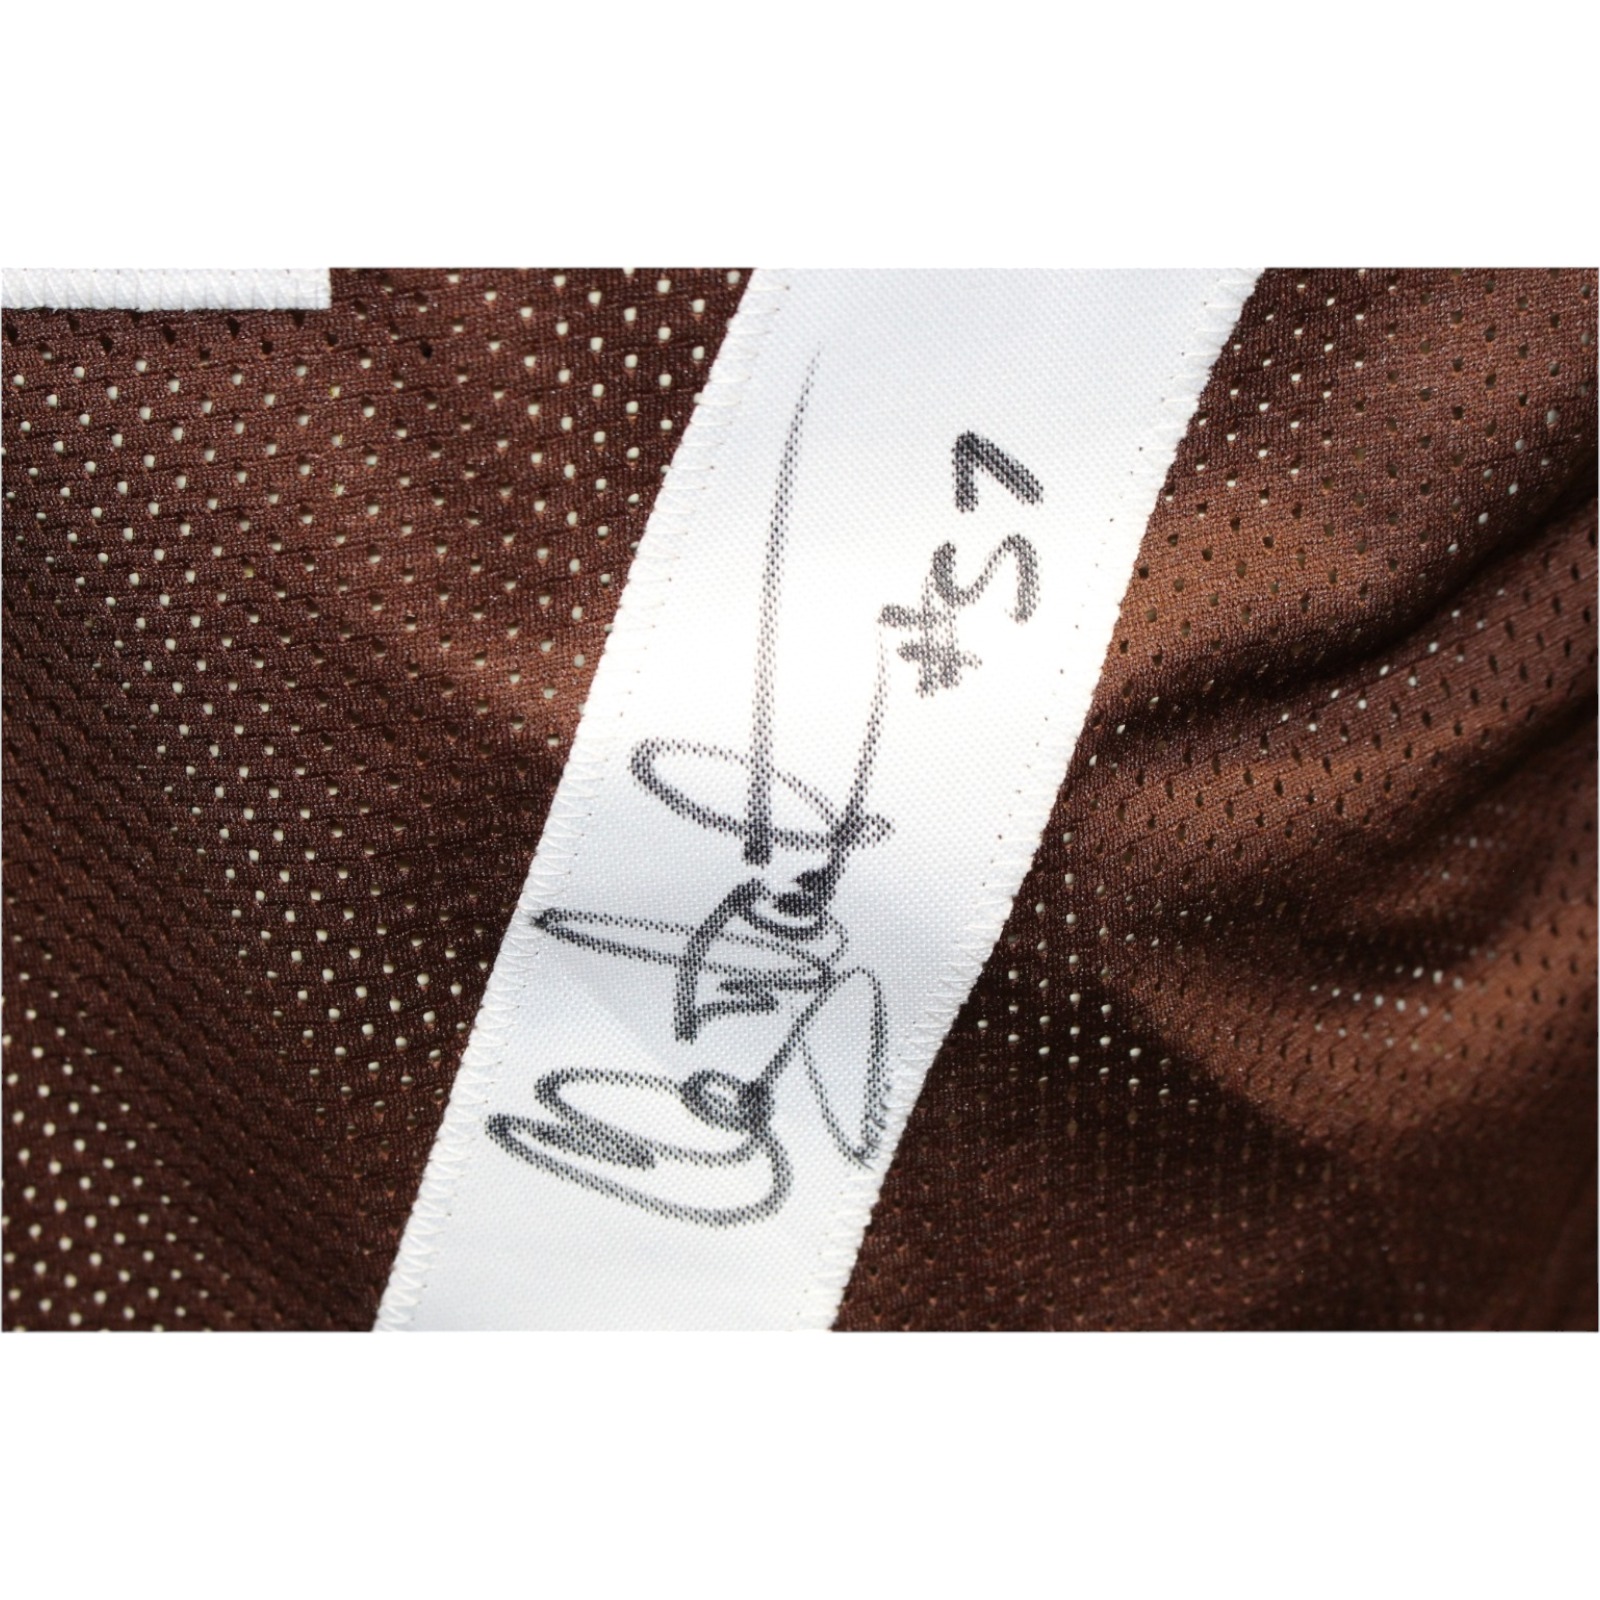 Clay Matthews Sr. Autographed/Signed Pro Style Brown Jersey Beckett